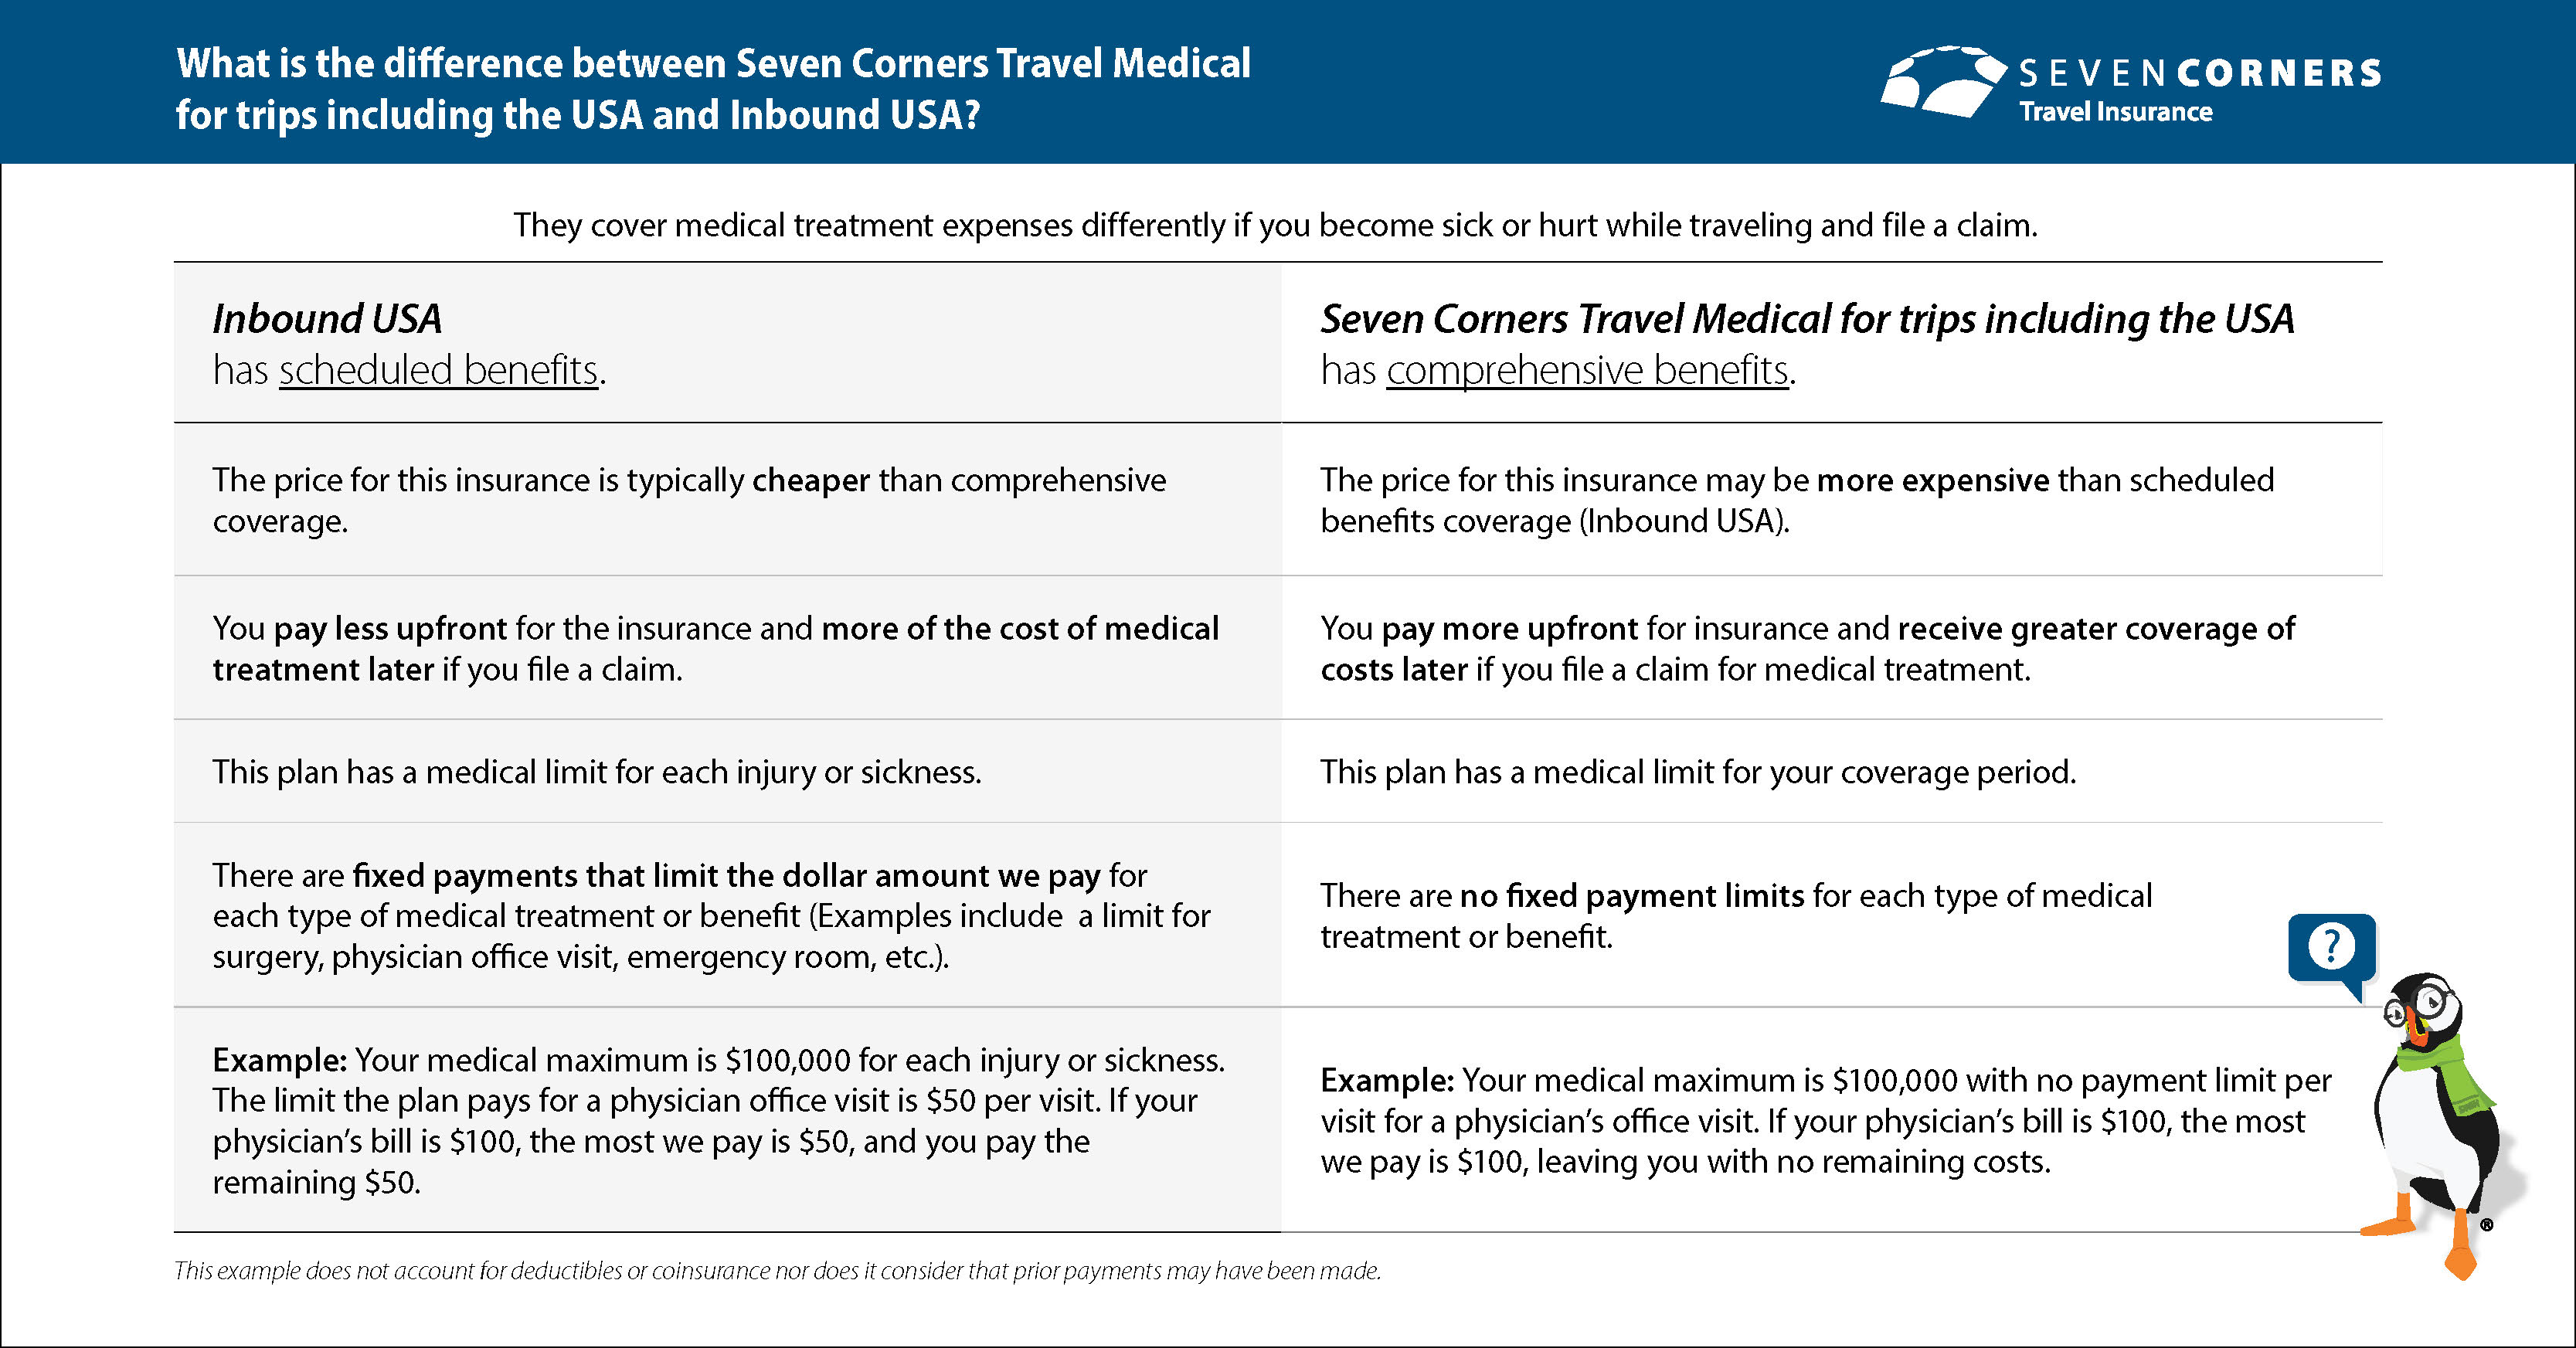 Image describing the differences between medical coverages for trips including the USA.